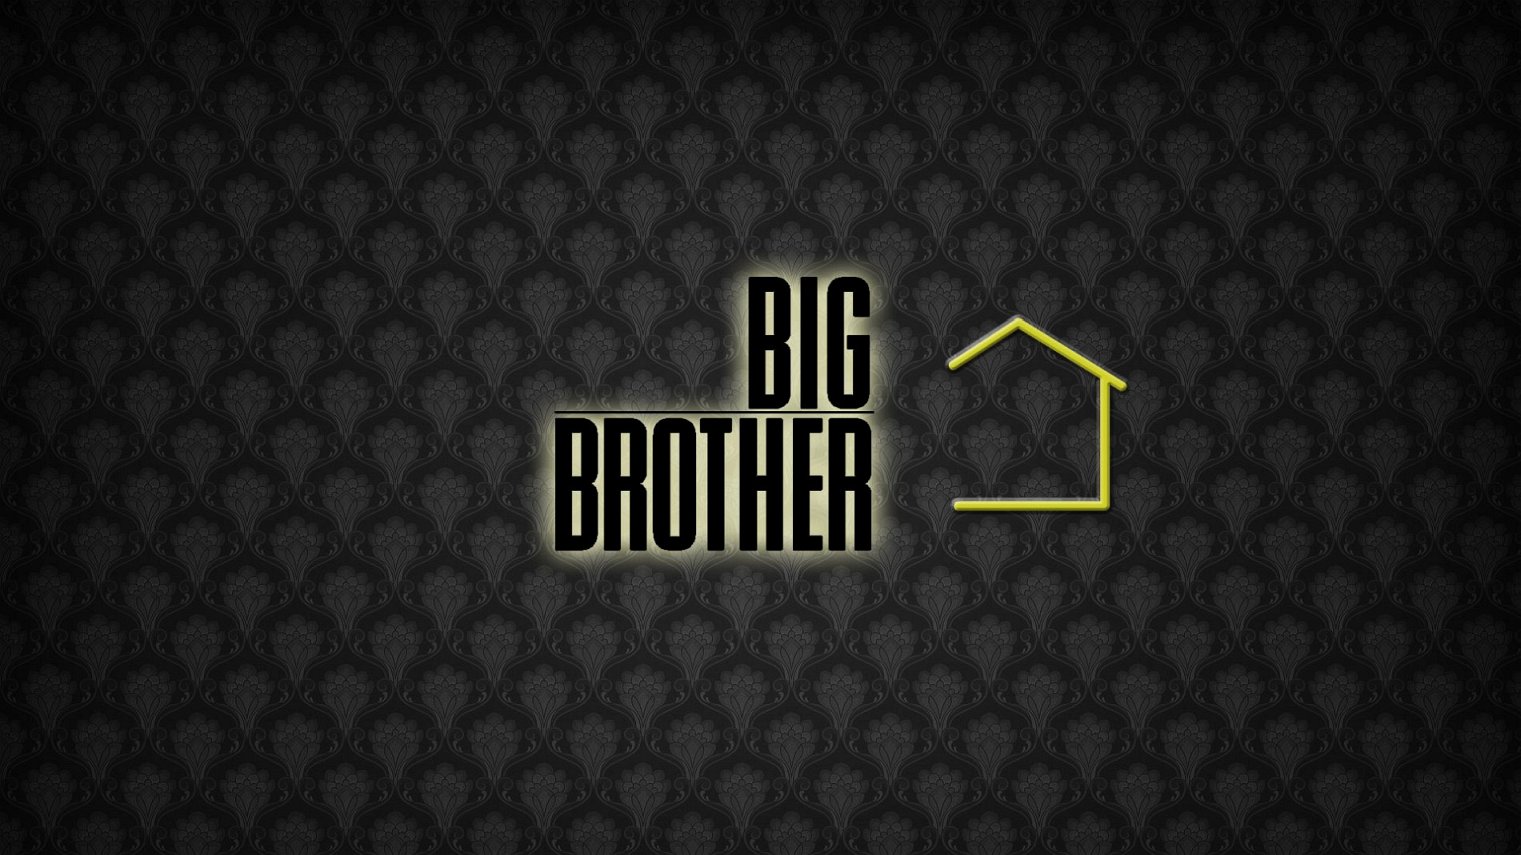 what time is Big Brother on